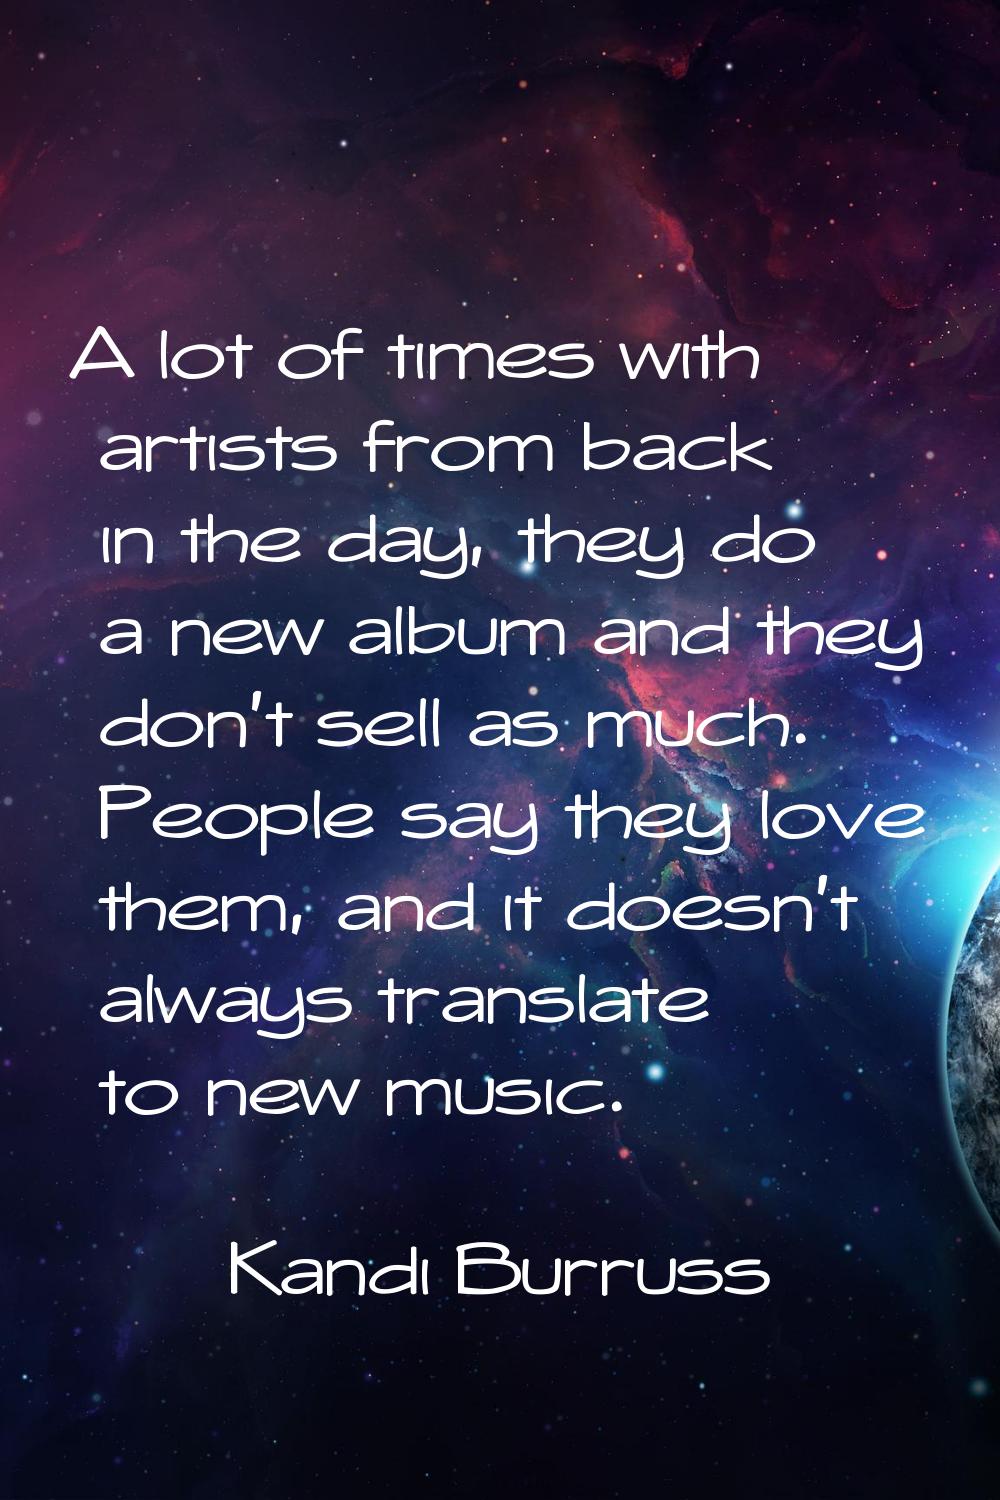 A lot of times with artists from back in the day, they do a new album and they don't sell as much. 